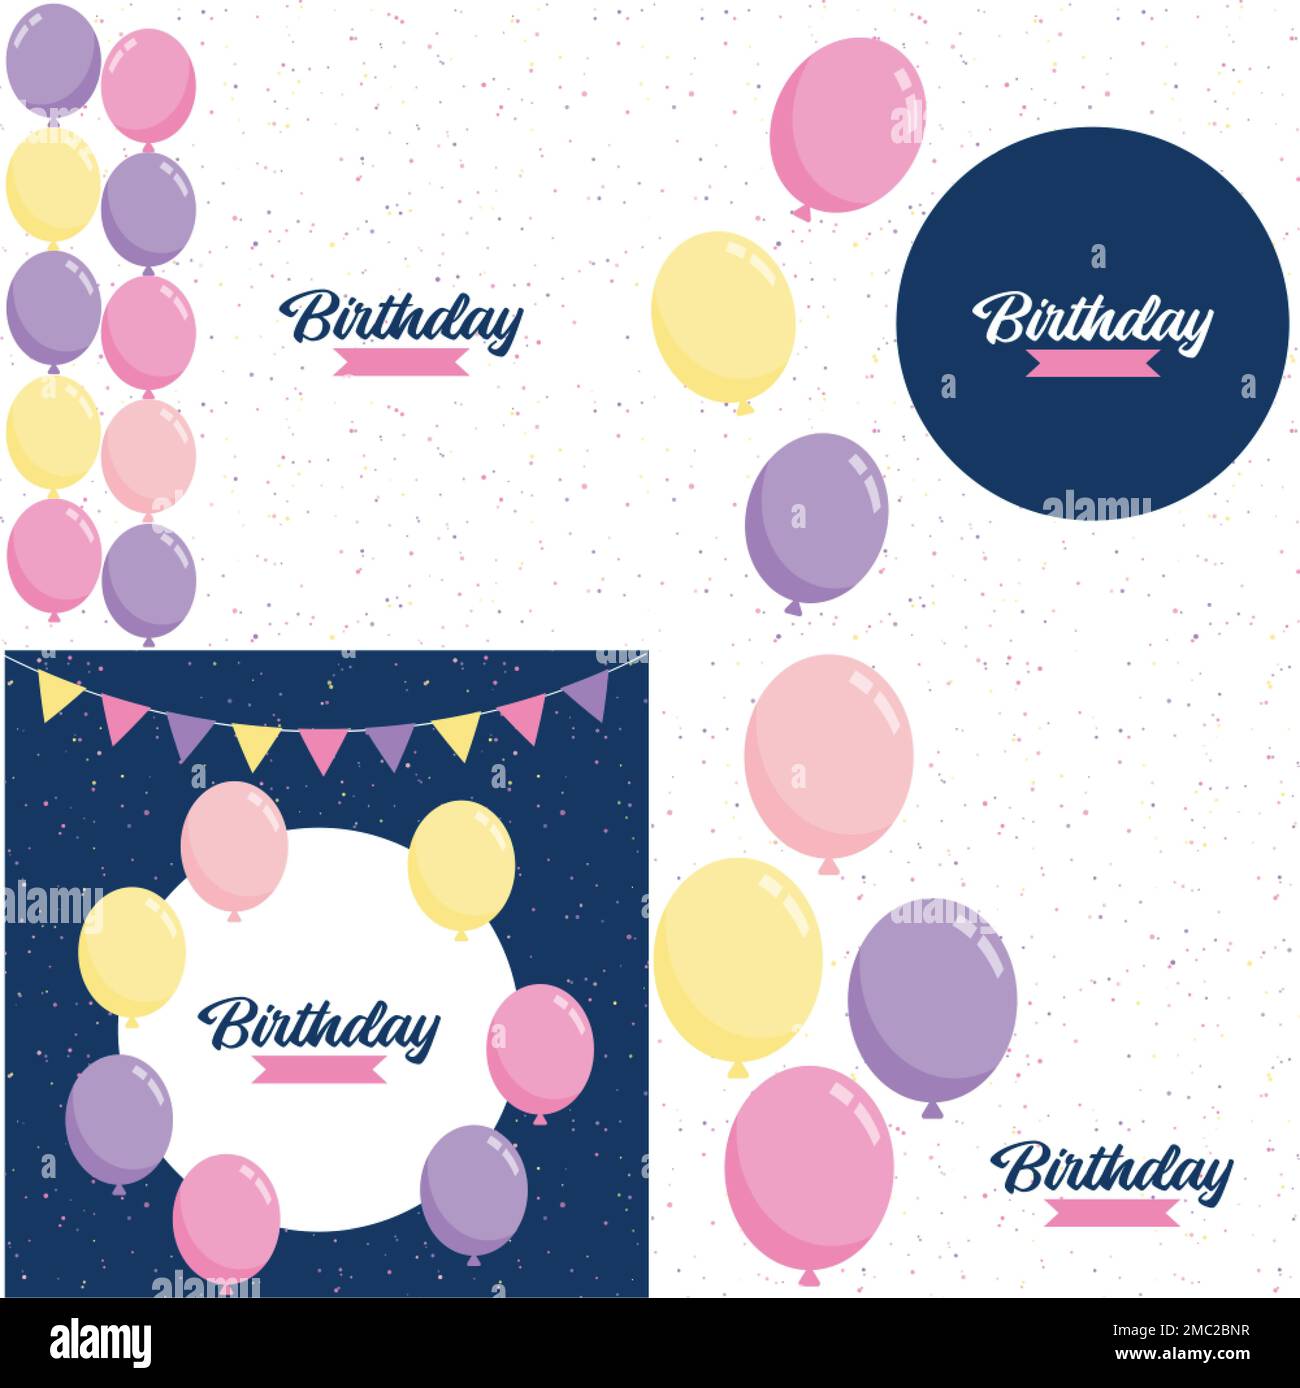 Vector illustration of aHappy Birthday celebration background with ...